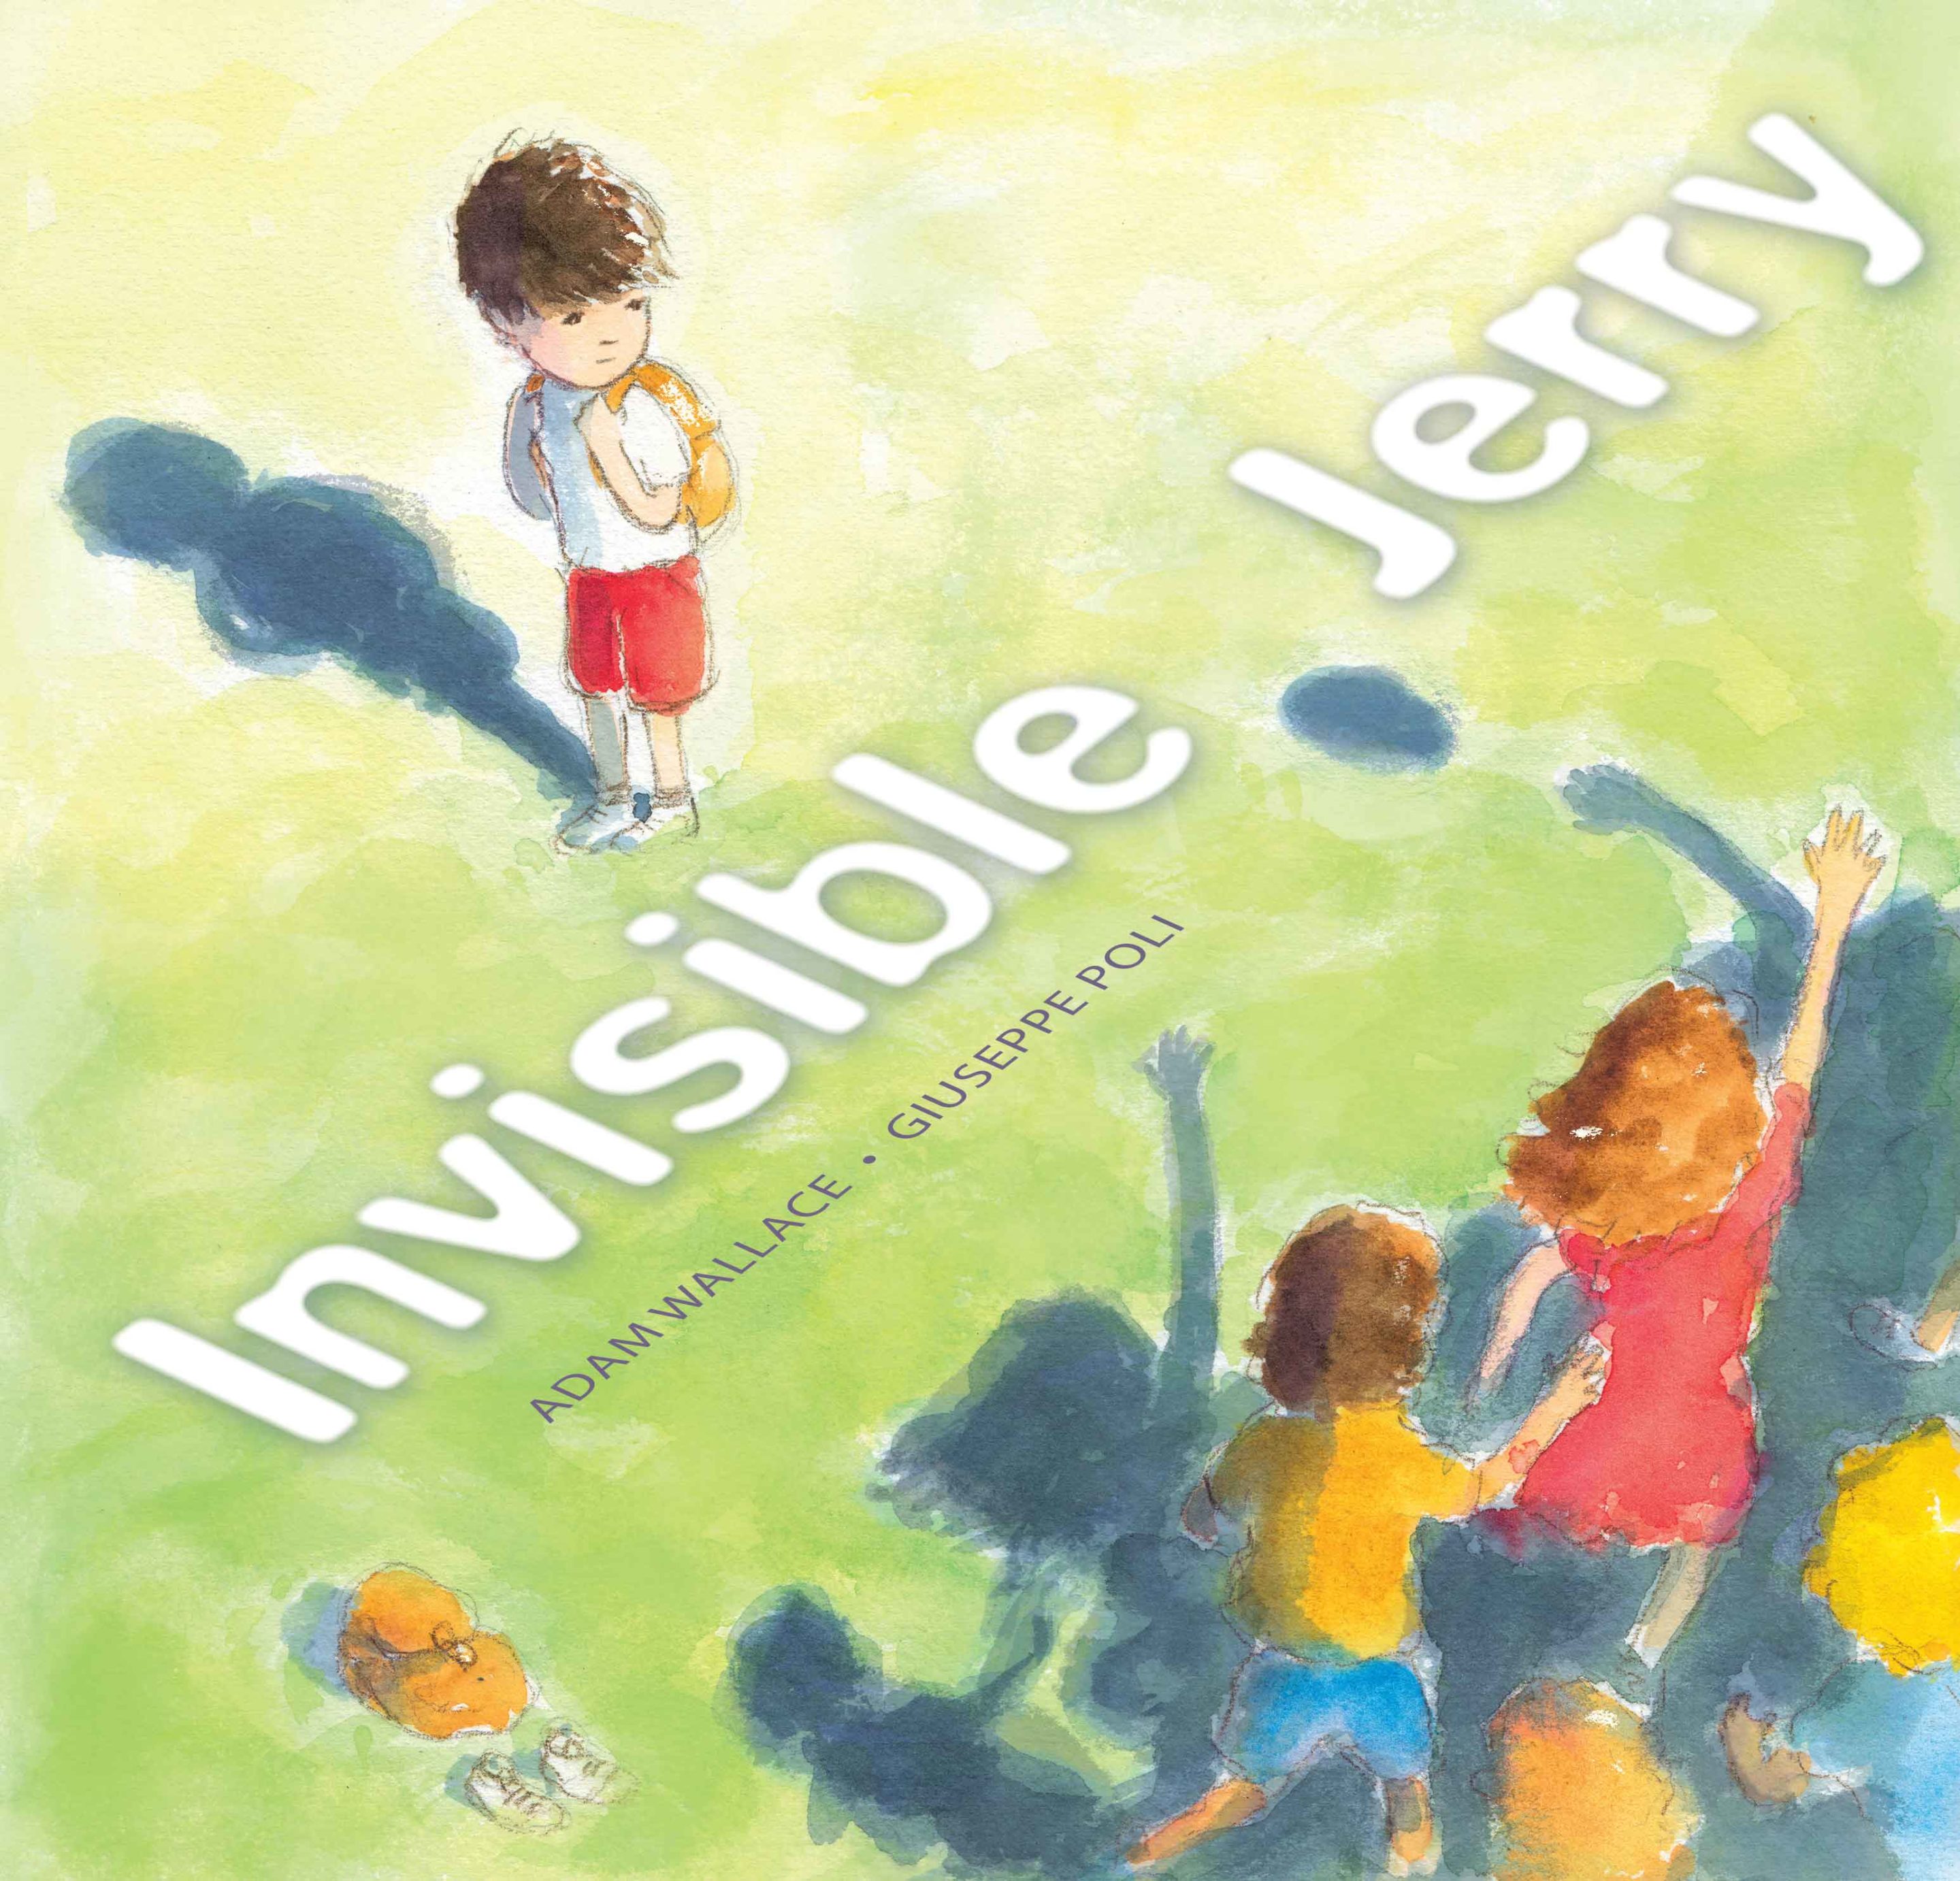 Invisible Jerry<img alt='' src='https://secure.gravatar.com/avatar/10599b06dd355a179eb9929ef1cd6ad7?s=92&d=mm&r=g' srcset='https://secure.gravatar.com/avatar/10599b06dd355a179eb9929ef1cd6ad7?s=184&d=mm&r=g 2x' class='avatar avatar-92 photo' height='92' width='92' loading='lazy'/>